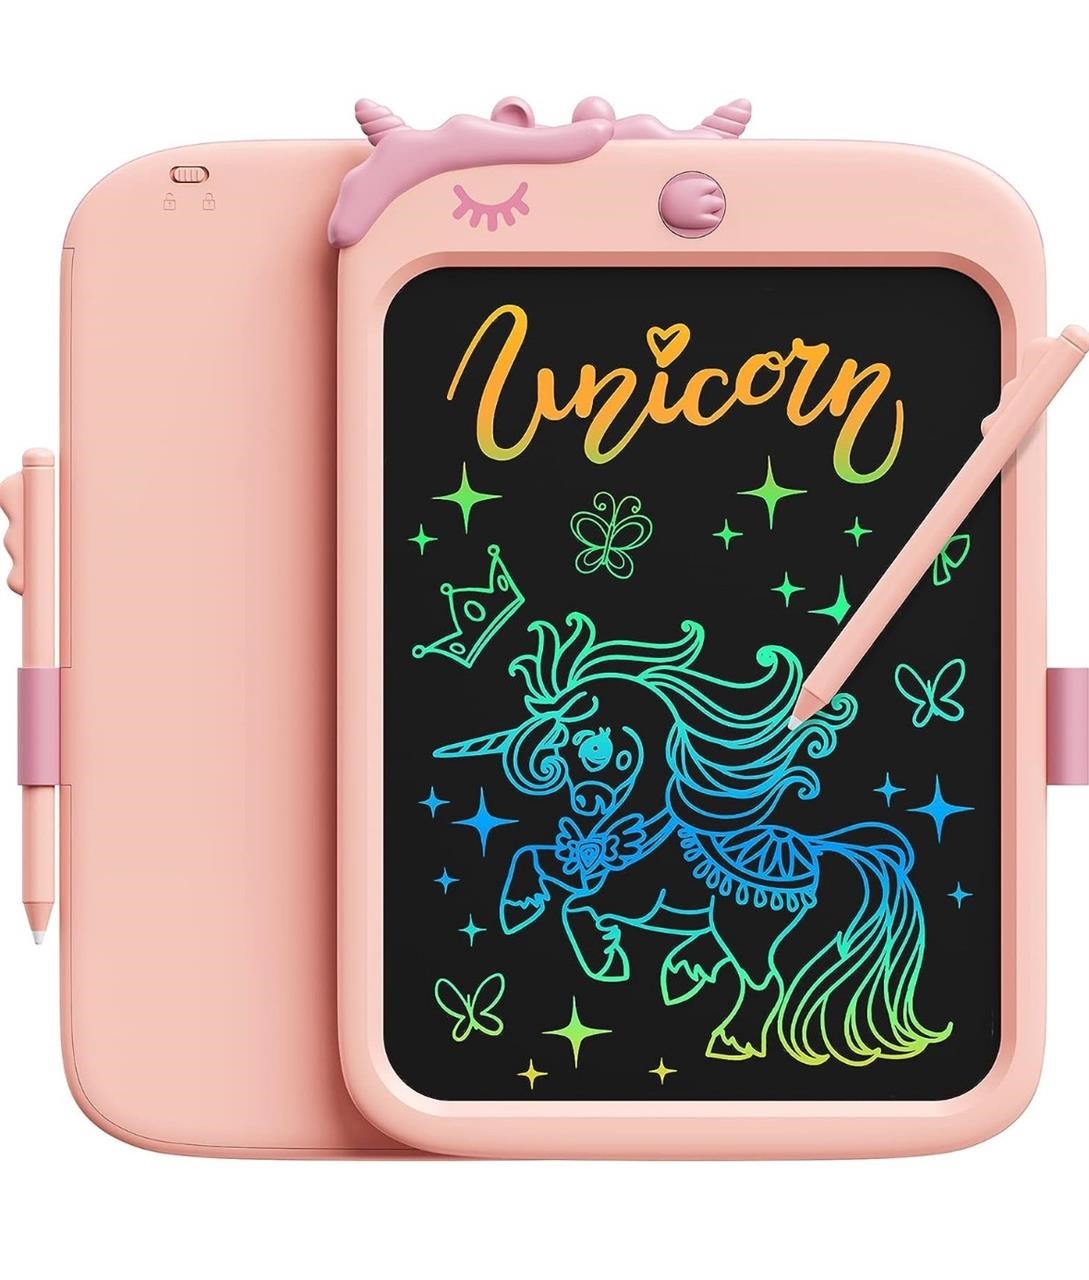 $31 10" LCD Writing Tablet Kids